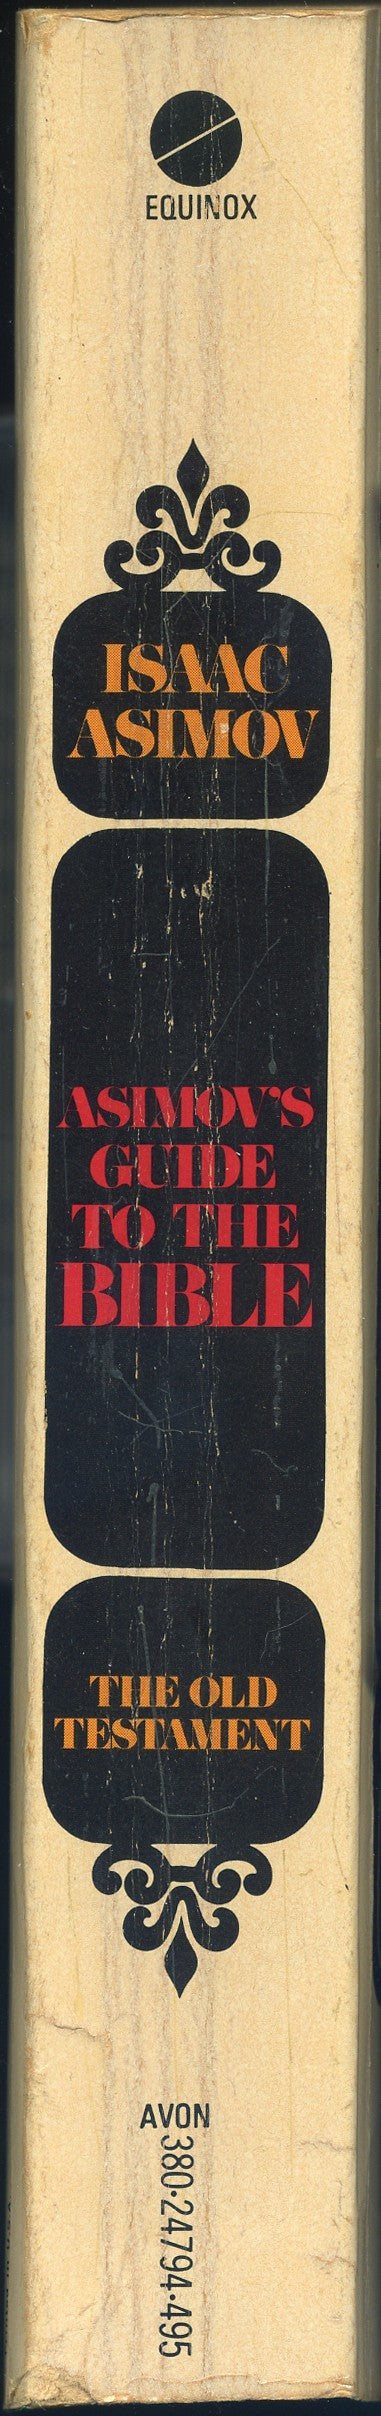 Asimov's Guide to the Bible: The Old Testament spine